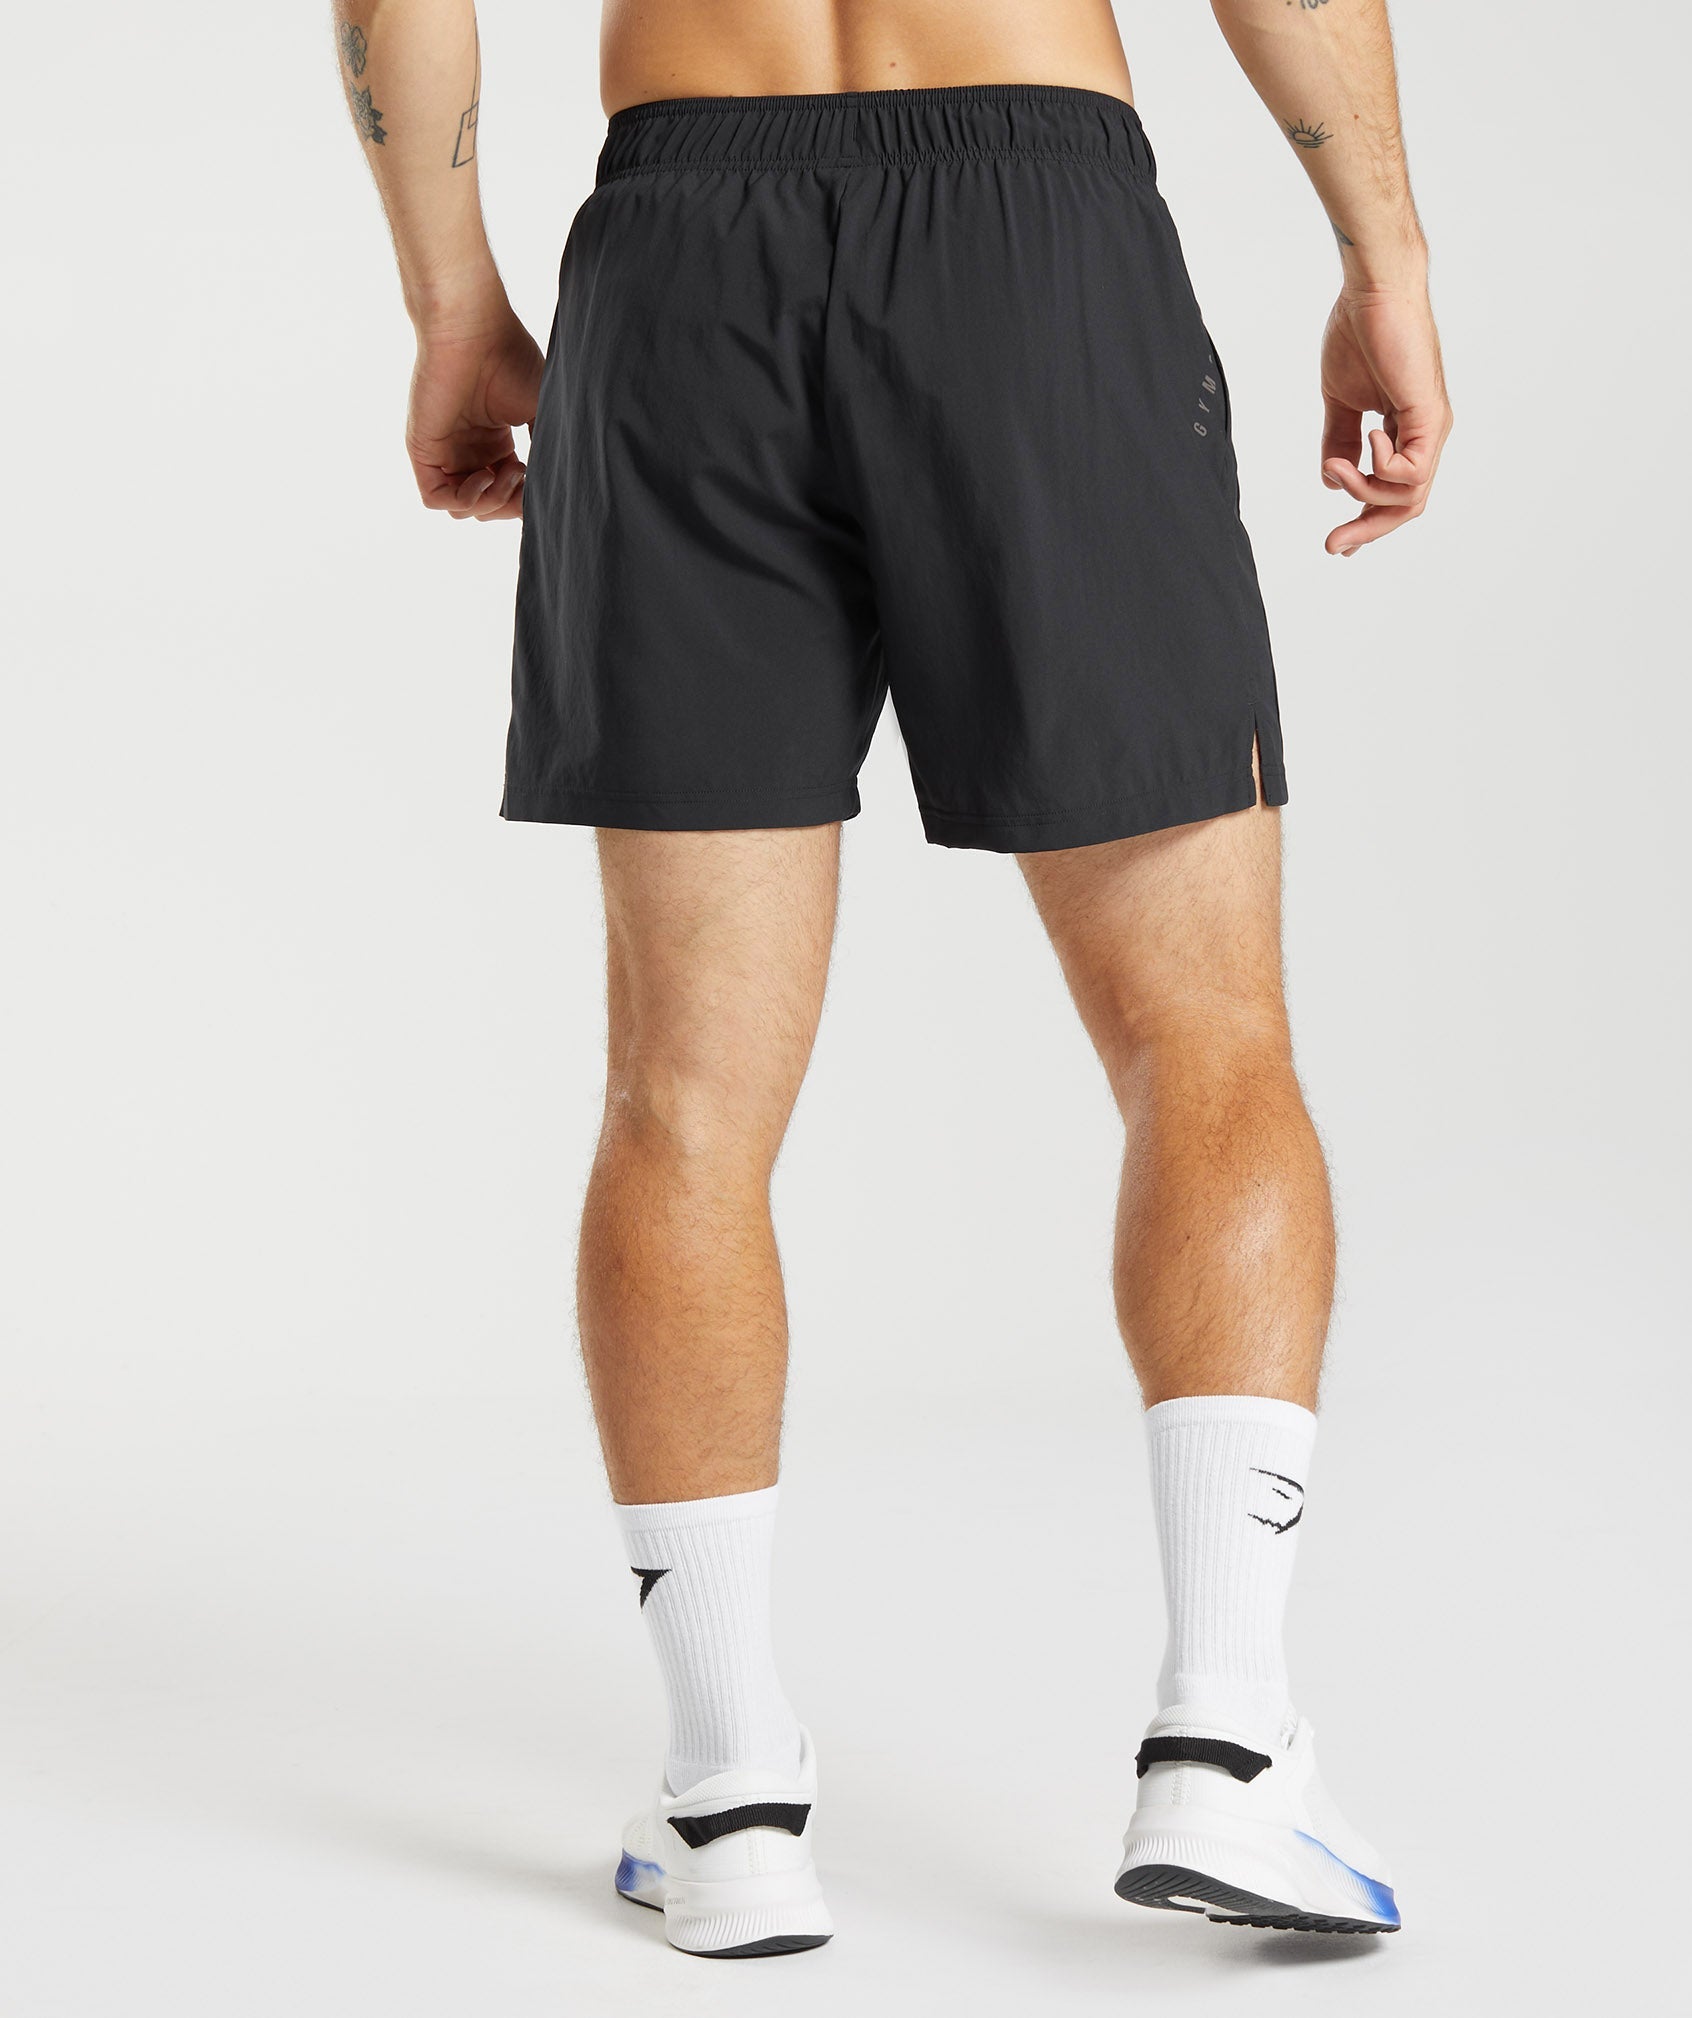 Jogging shorts for men: Comfort, Style, and Performance Tips缩略图